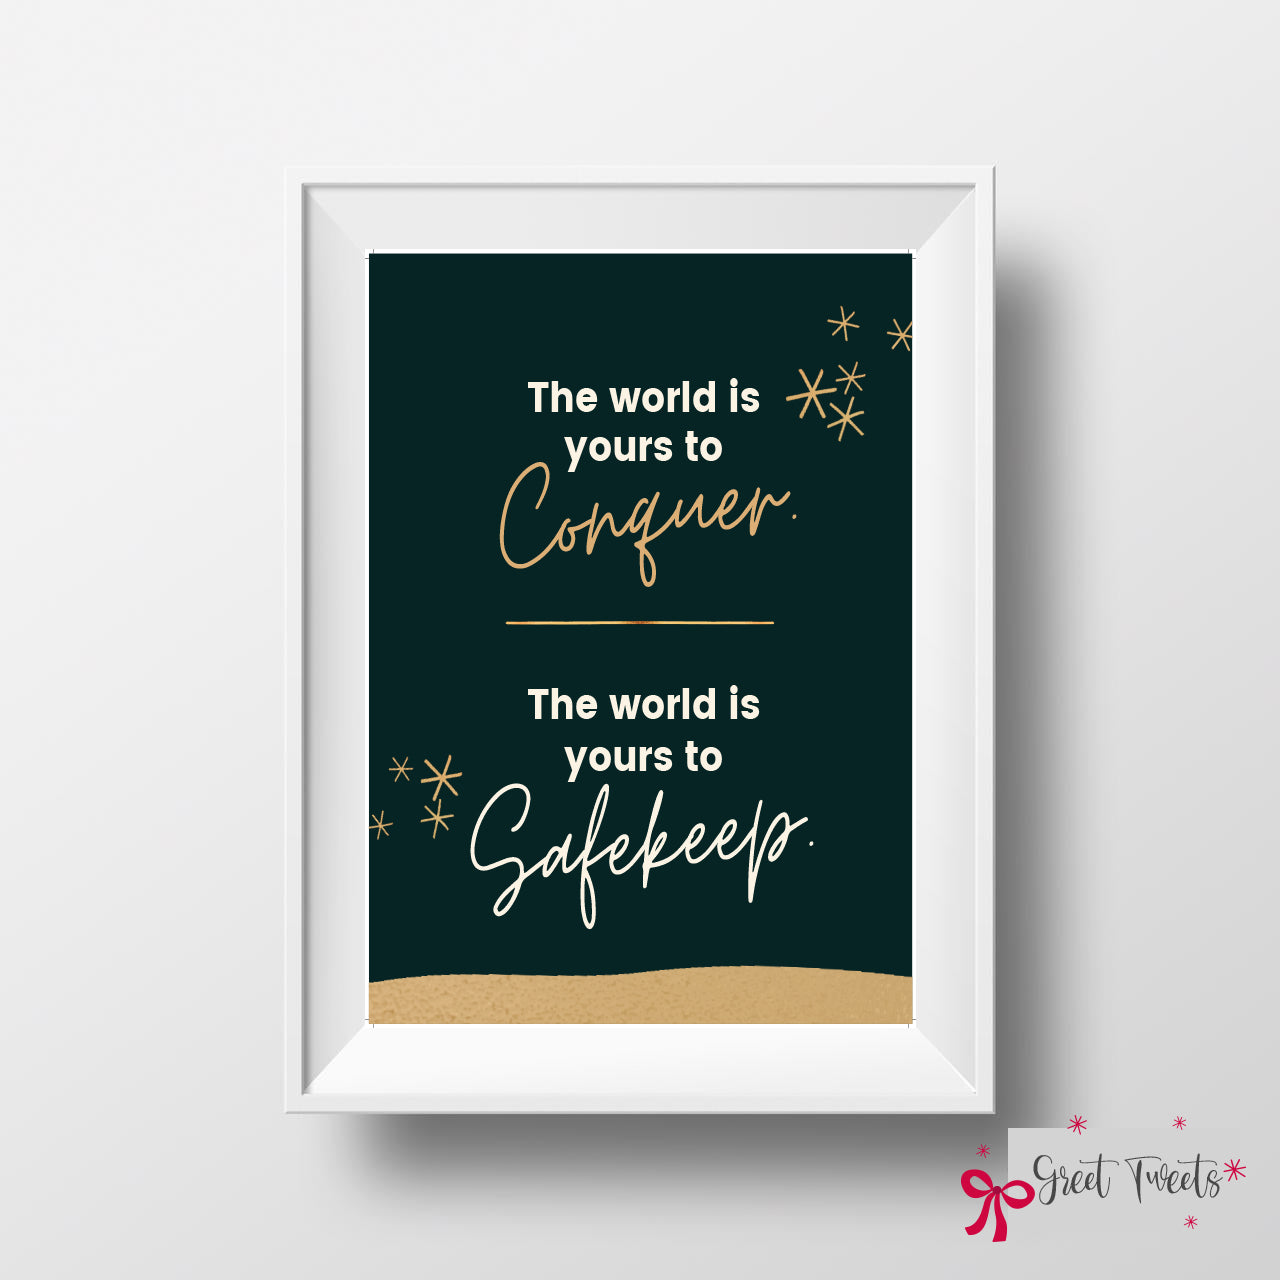 Personalized Art - The World is yours